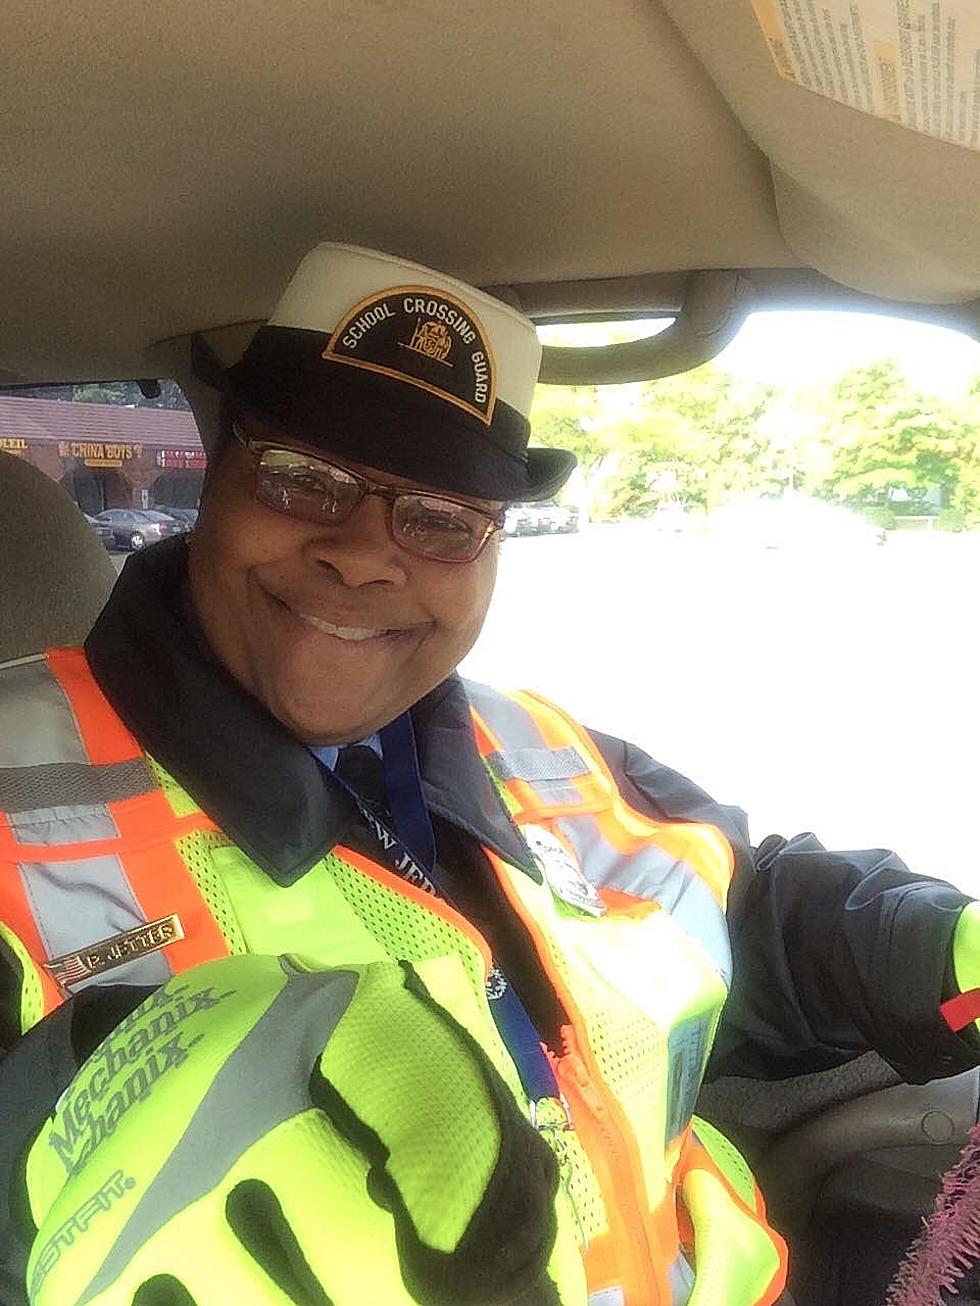 Well Known Hamilton Crossing Guard Featured on Netflix Series